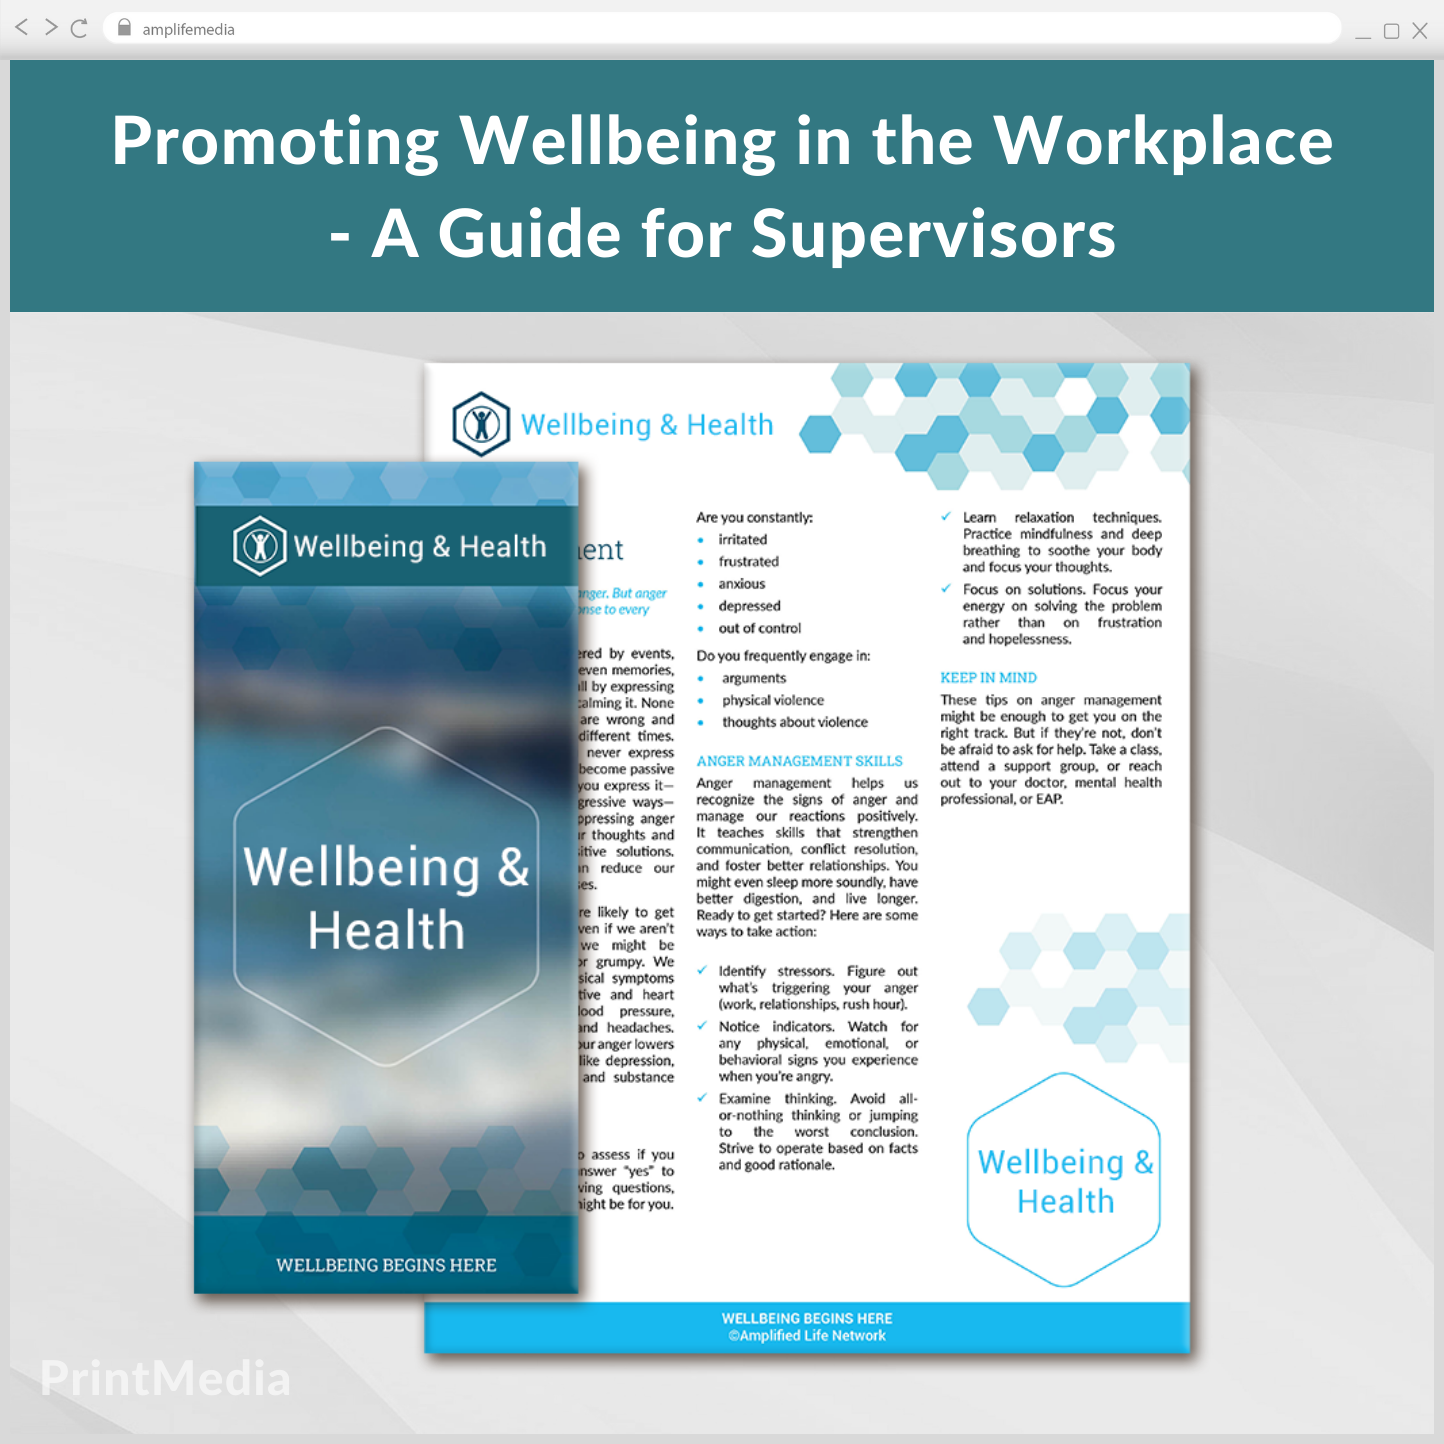 Subscription to Wellbeing Media: Promoting Wellbeing in the Workplace - for Supervisors PrintMedia 223